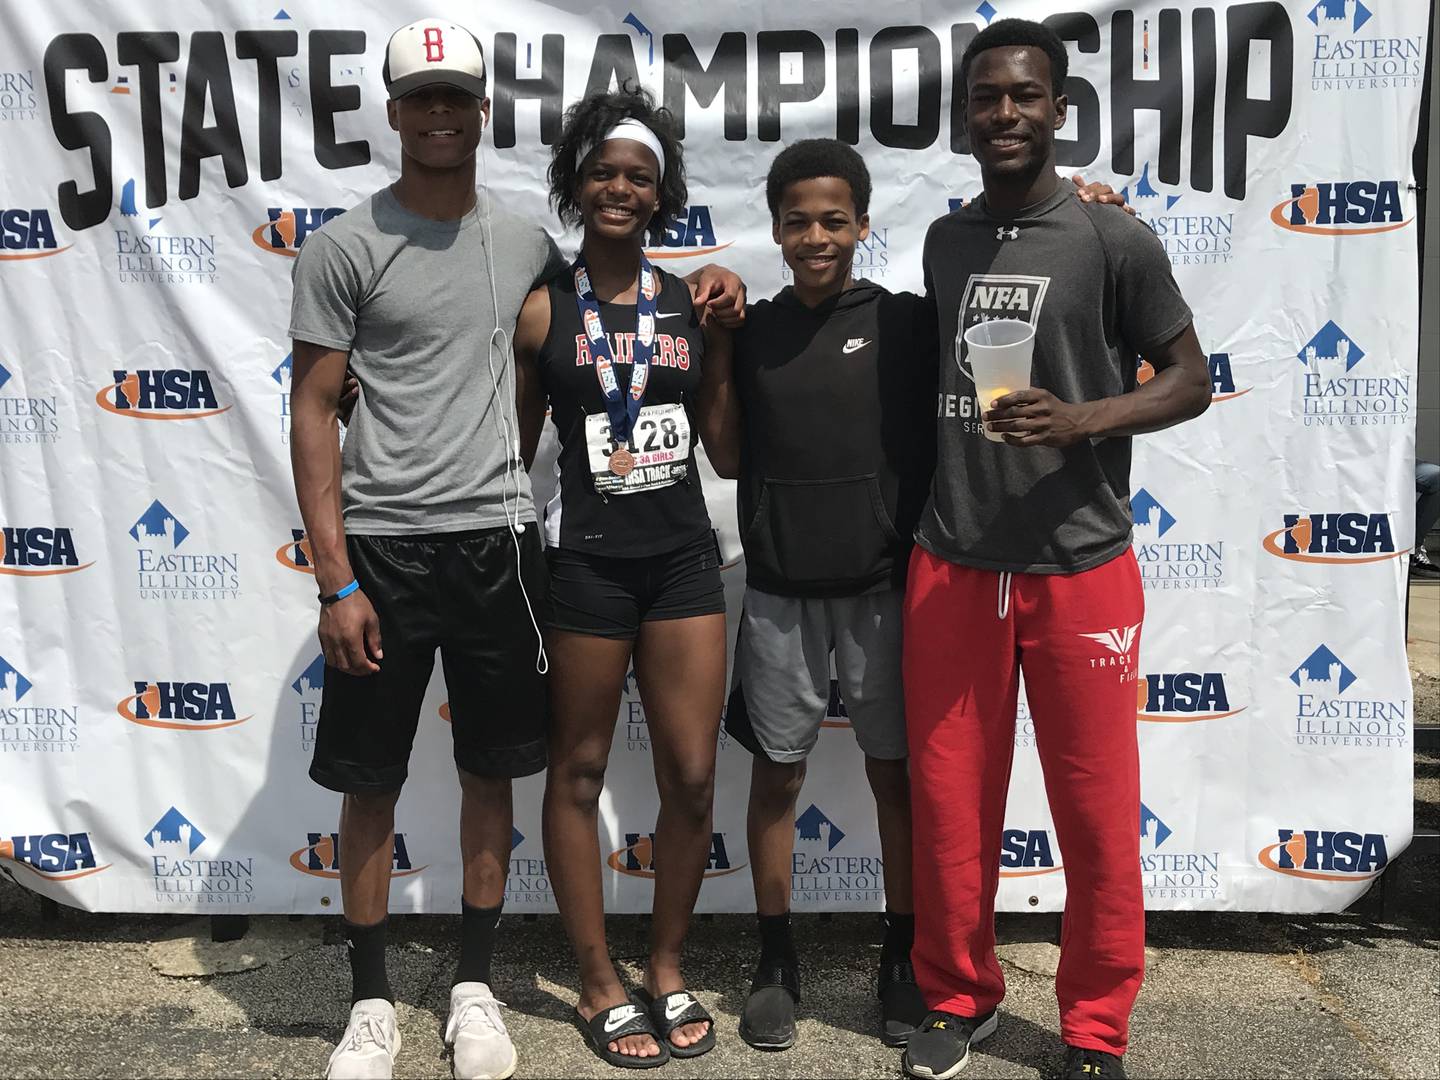 Justin, Kayla, Damon and Brendon pose after Kayla's race at the IHSA girls track and field state championships.